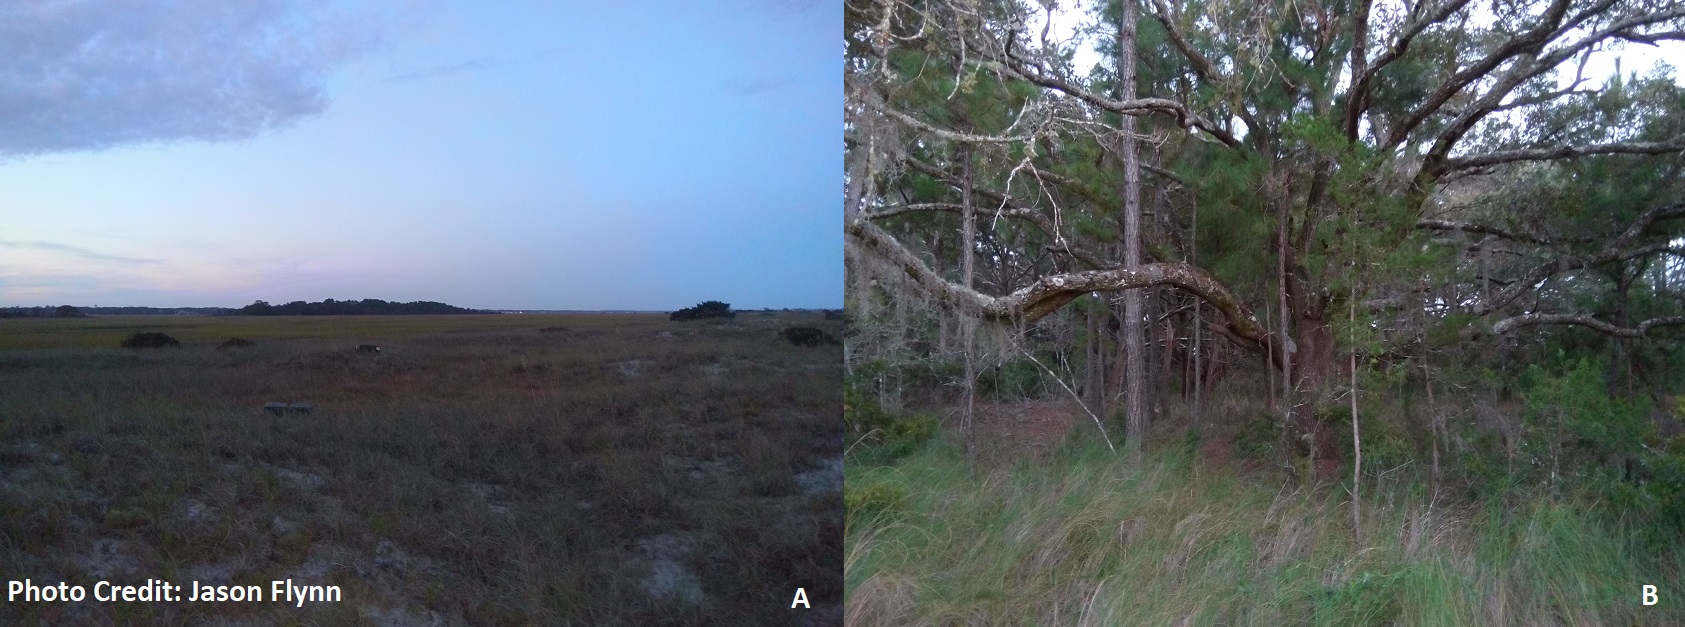 A)A wild live oak at Huntington Beach State Park, in the Coastal Zone. B) Drunken Jack Island at Huntington Beach State Park. A rare example of a geologic feature seen (islands) commonly in the Coastal Zone area south of the Grand Strand region in SC.